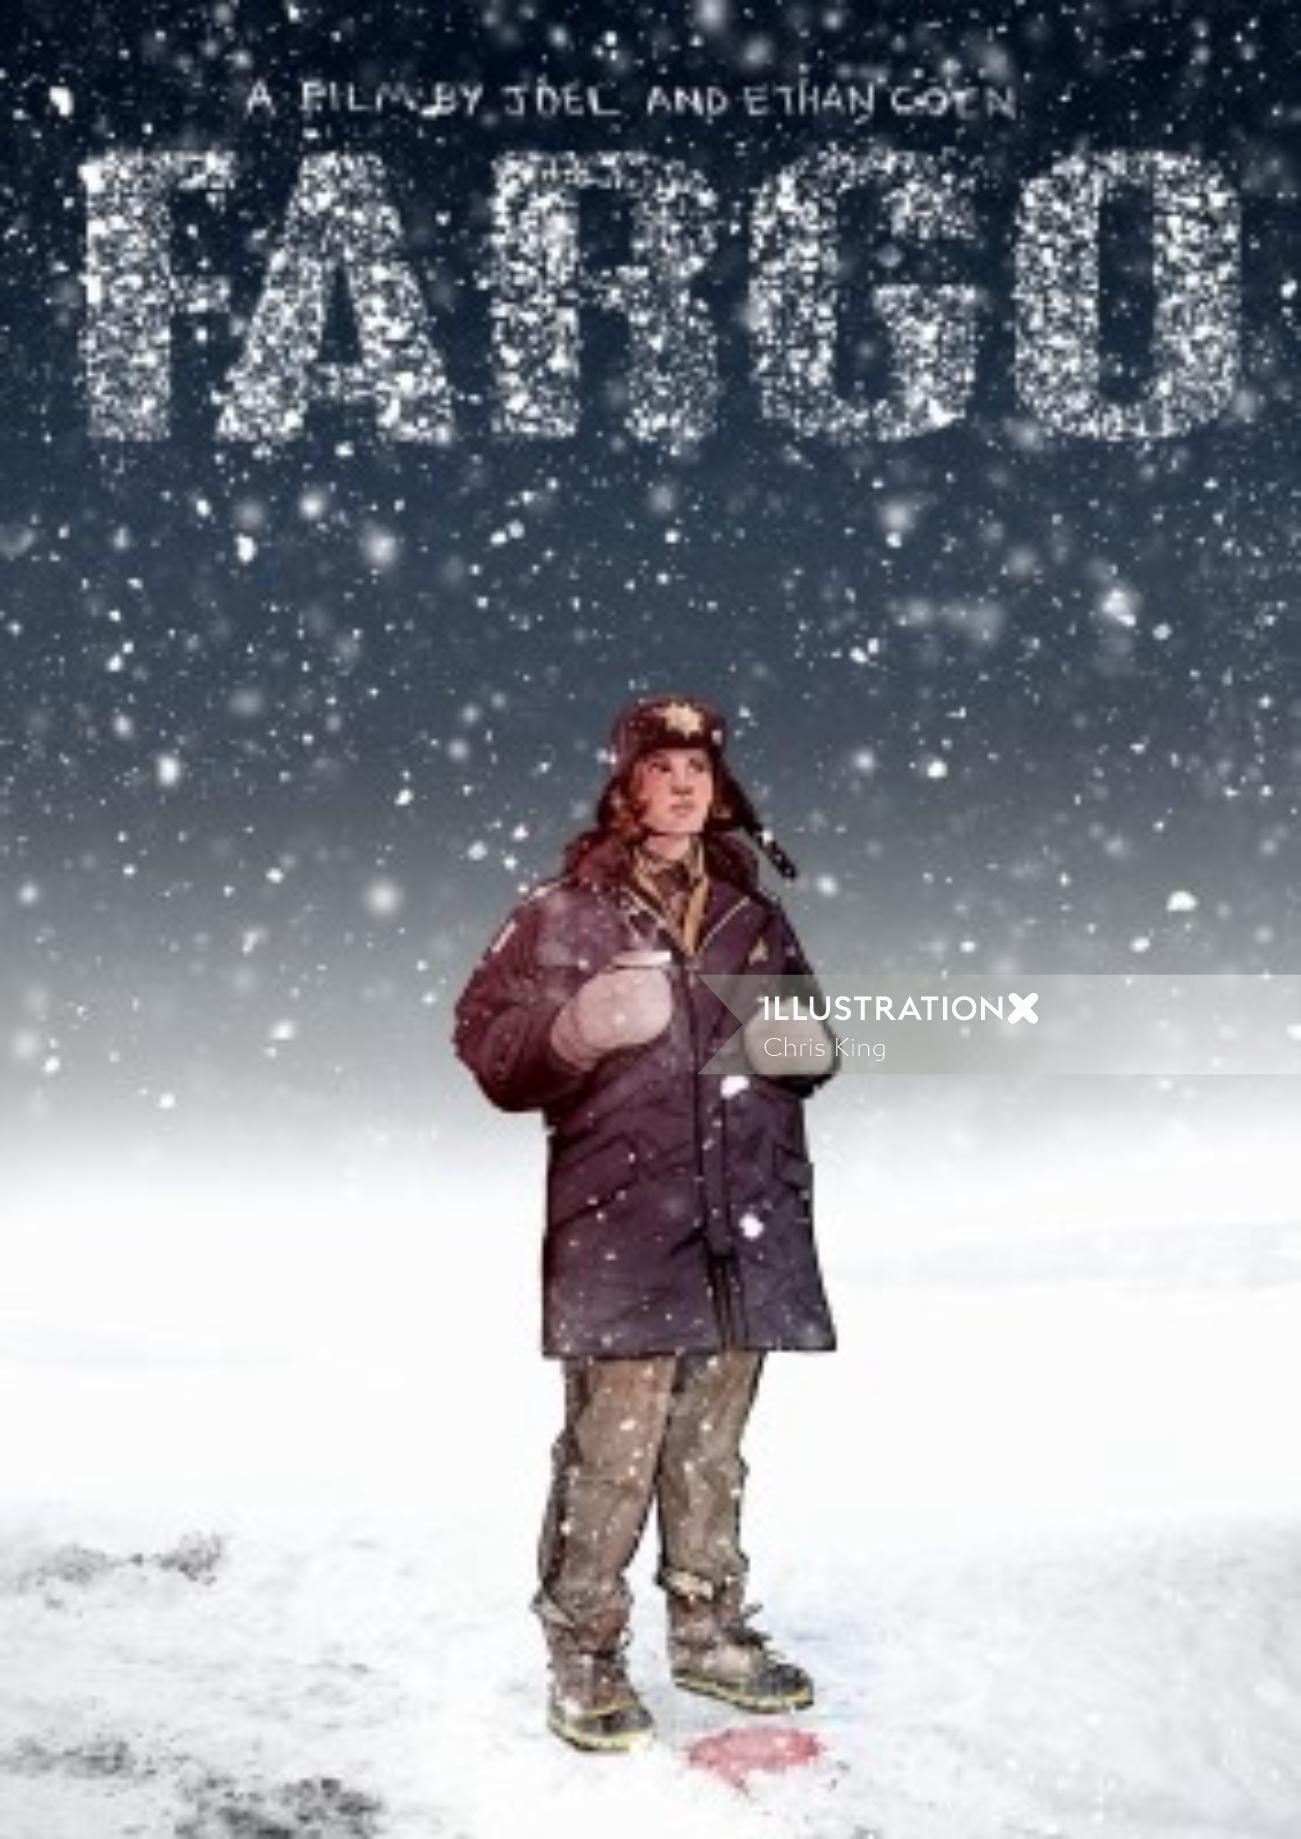 fargo movie poster by chris king